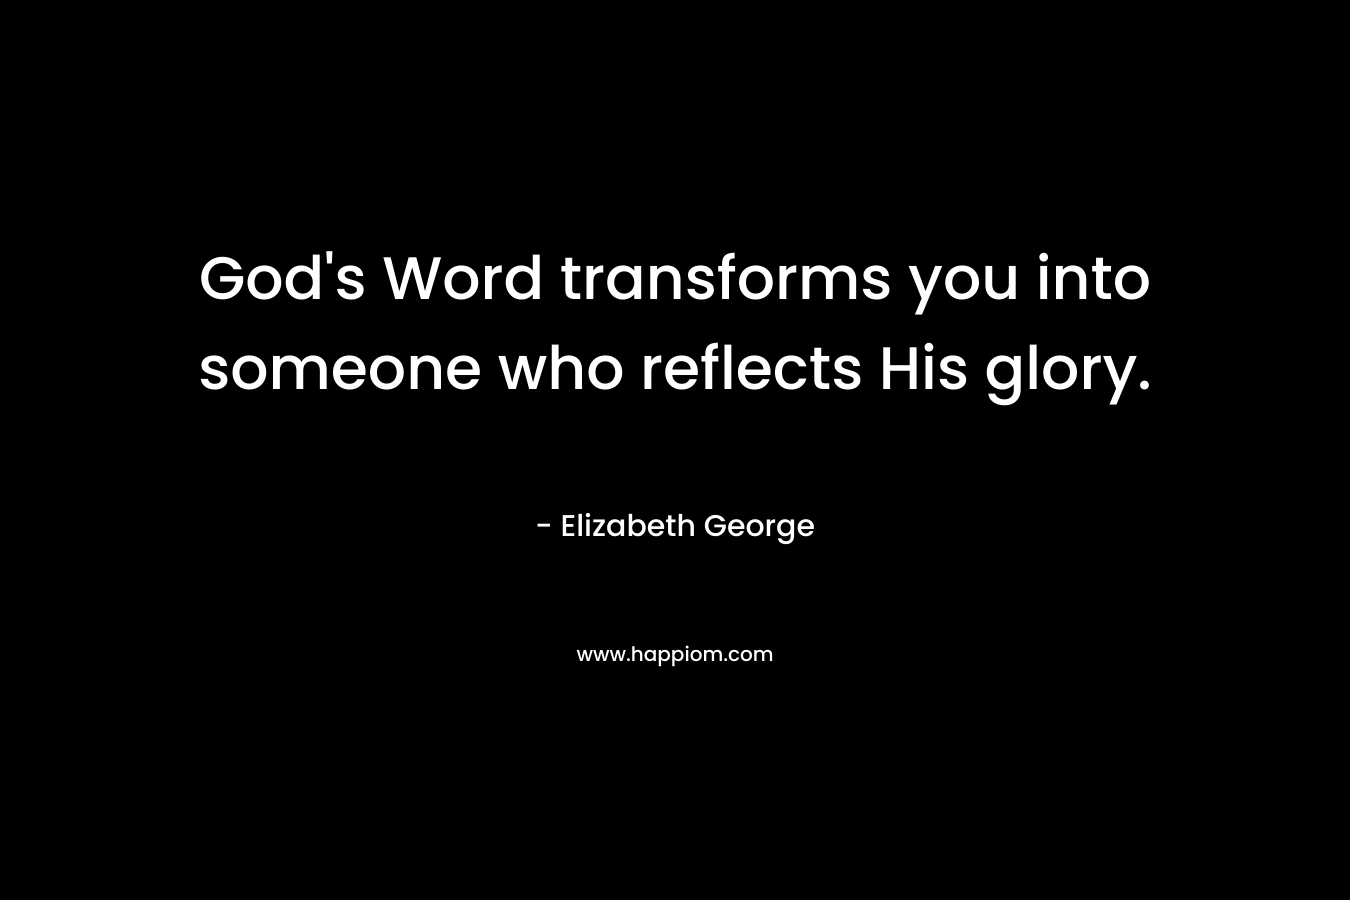 God's Word transforms you into someone who reflects His glory.